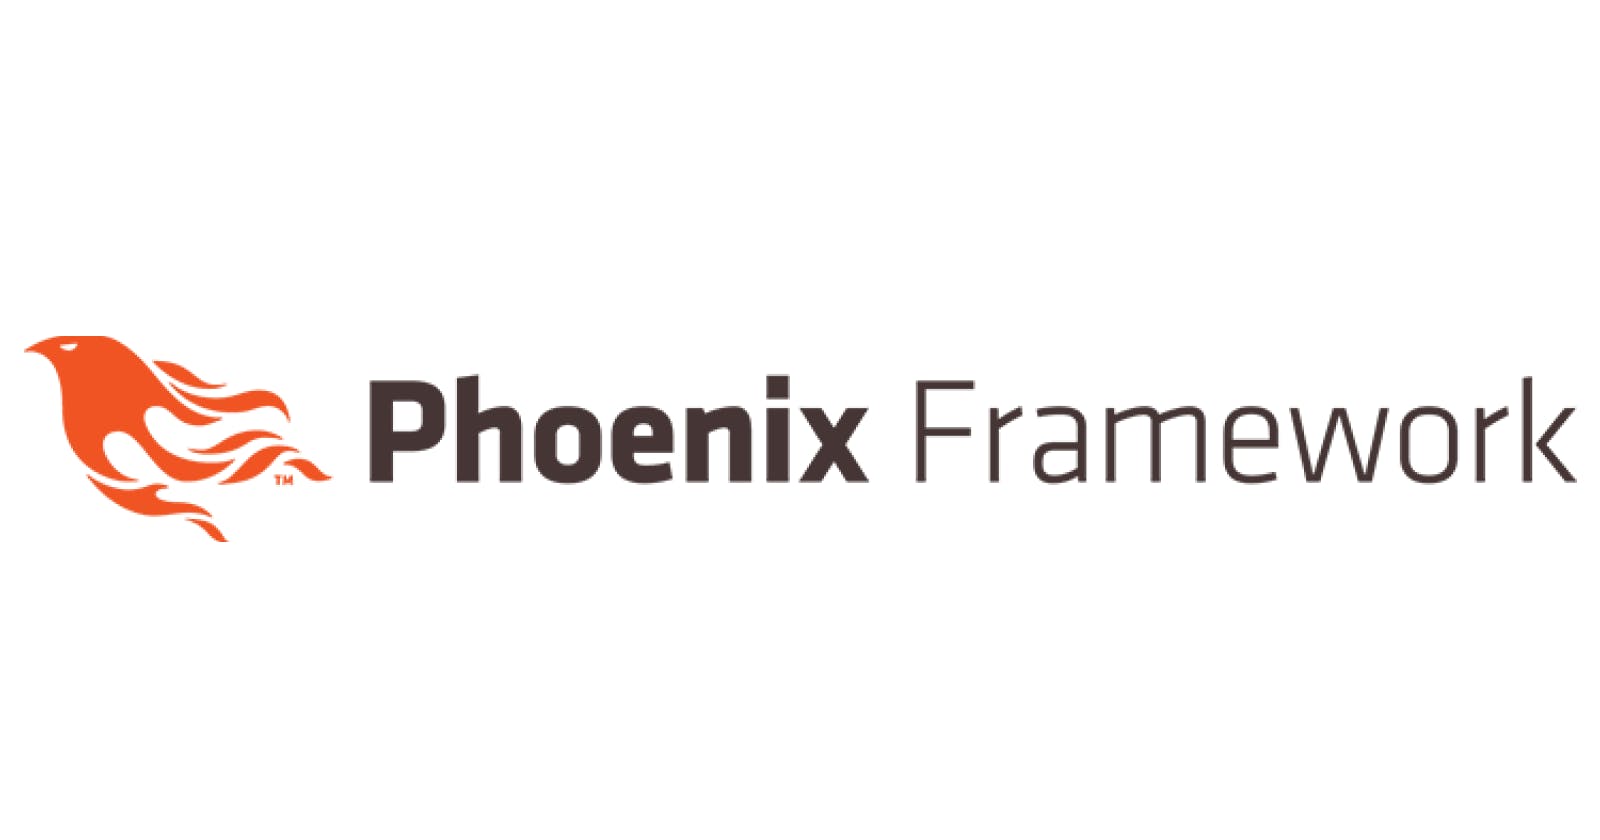 Getting started with Phoenix framework